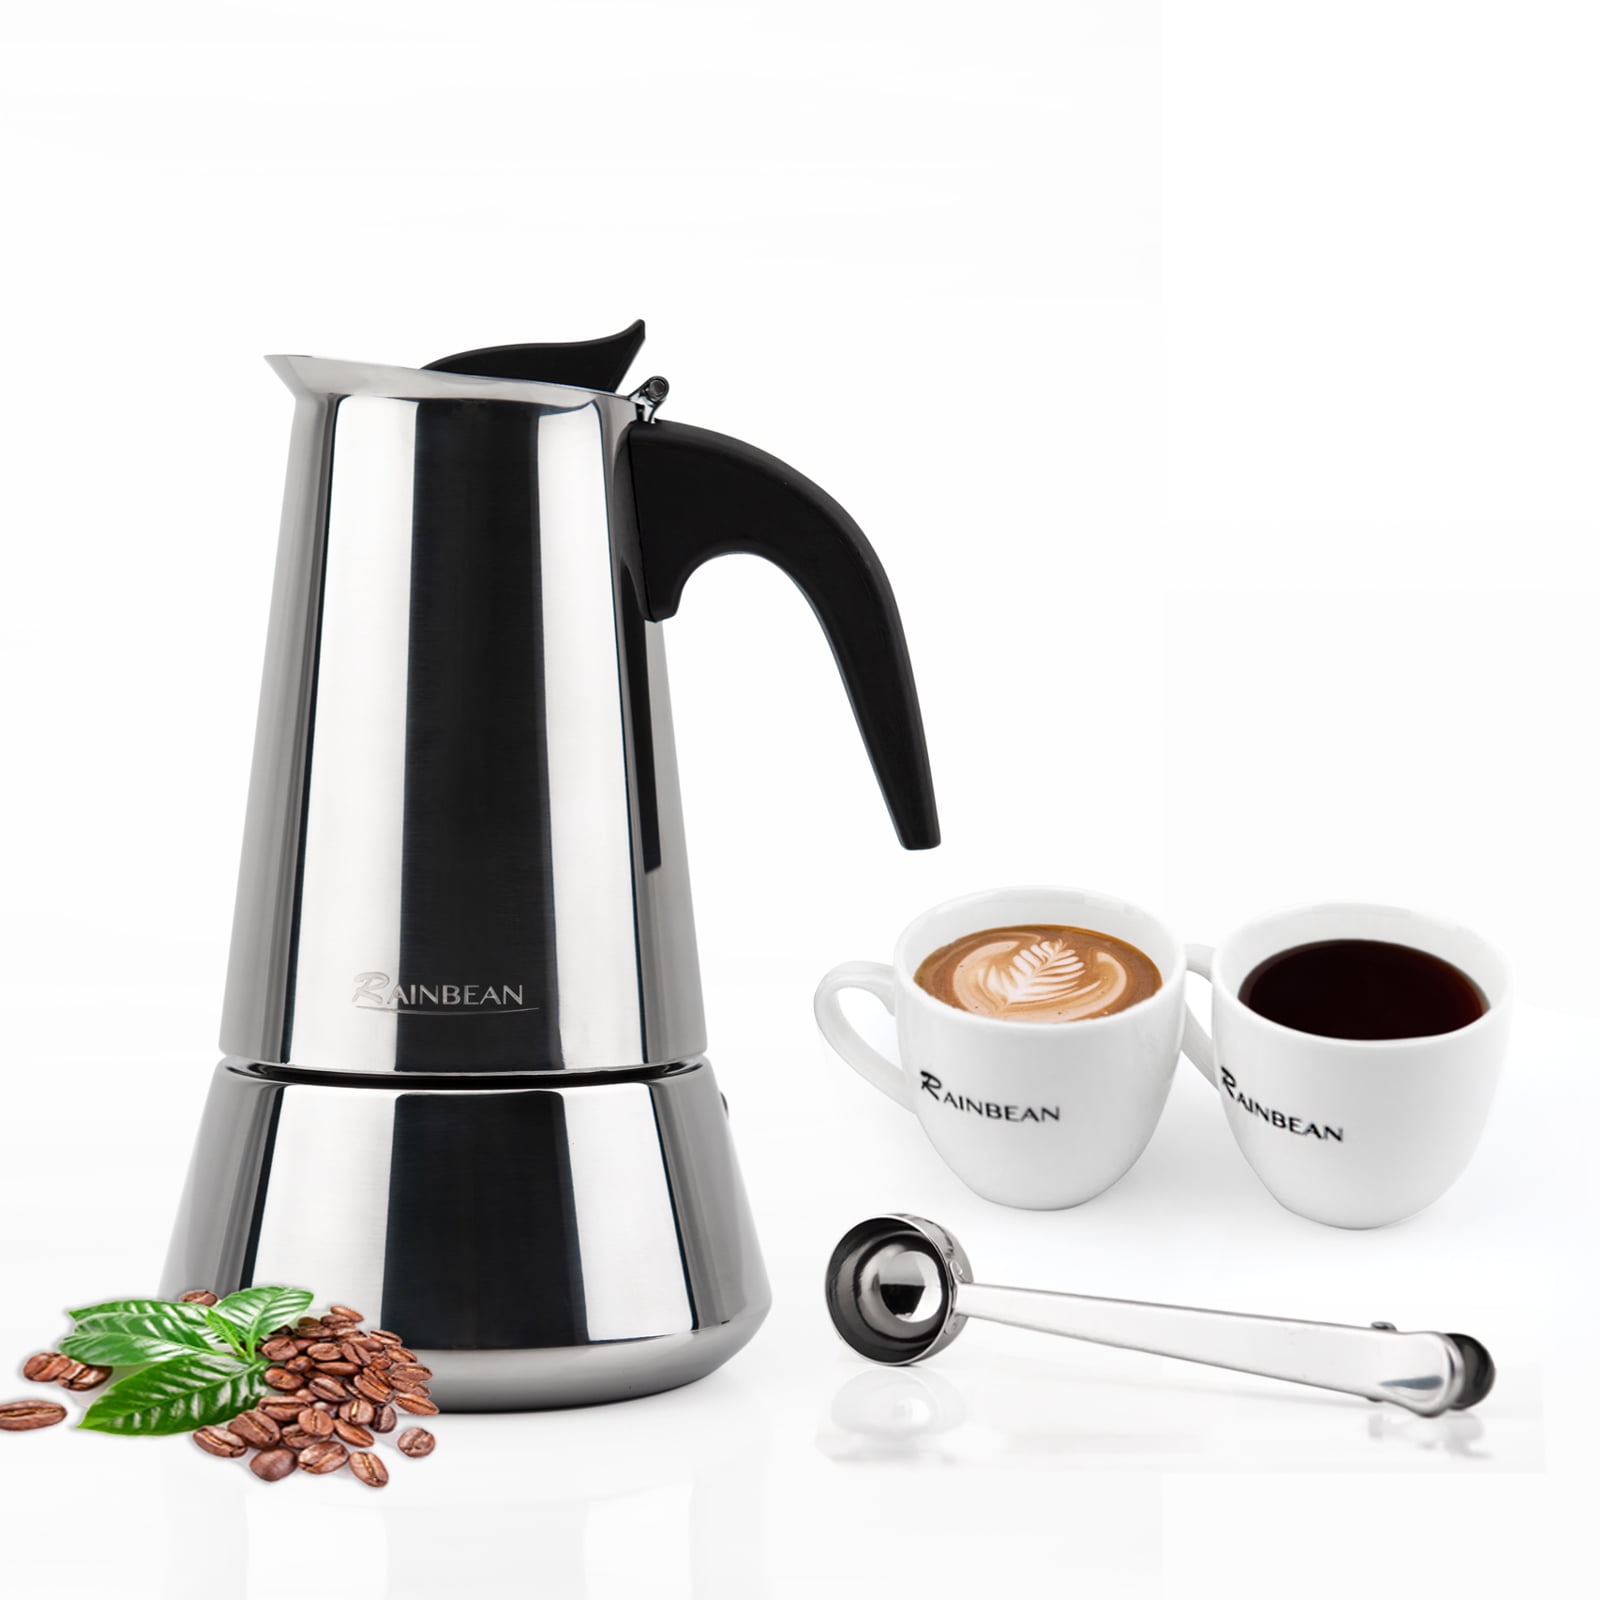 Espresso Maker with Steamer Renewed 3.5Bar Espresso Coffee Maker Yabano Espresso Machine Espresso and Cappuccino Machine with Milk Frother